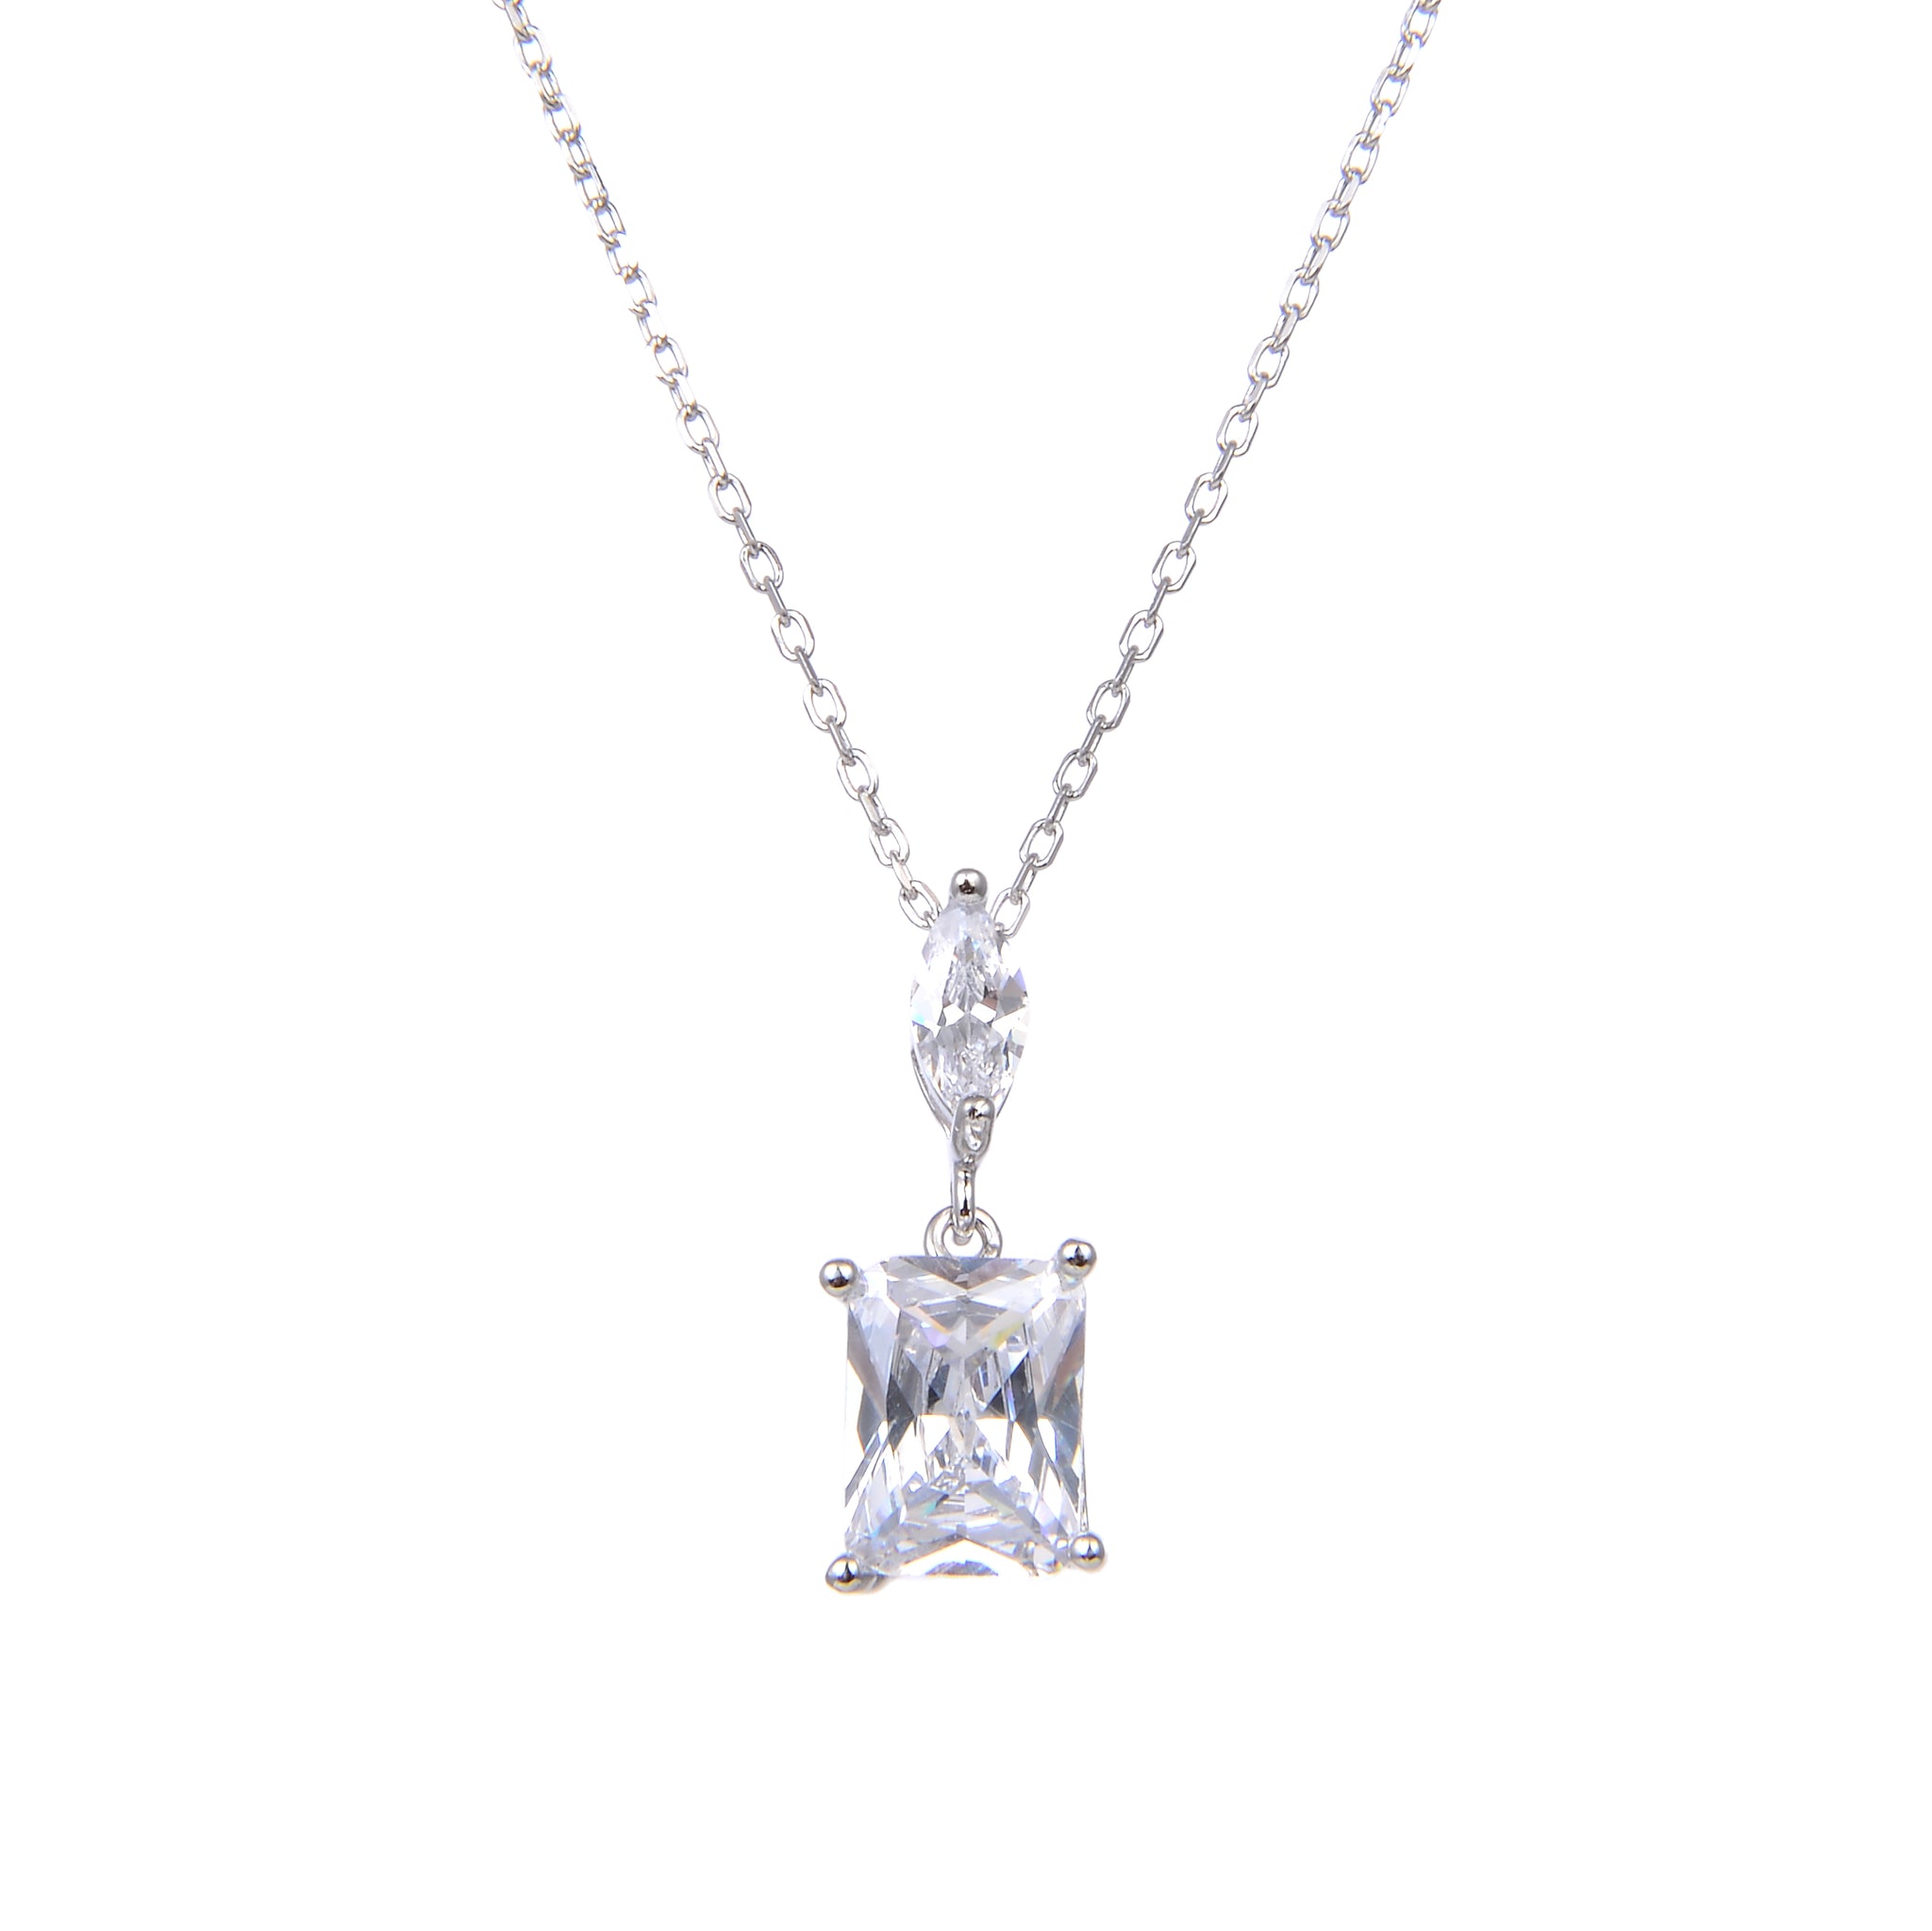 92.5 Sterling Silver Necklace Chain With CZ Cubic Zirconia Sterling Silver Emerald Cut Stud Pendant